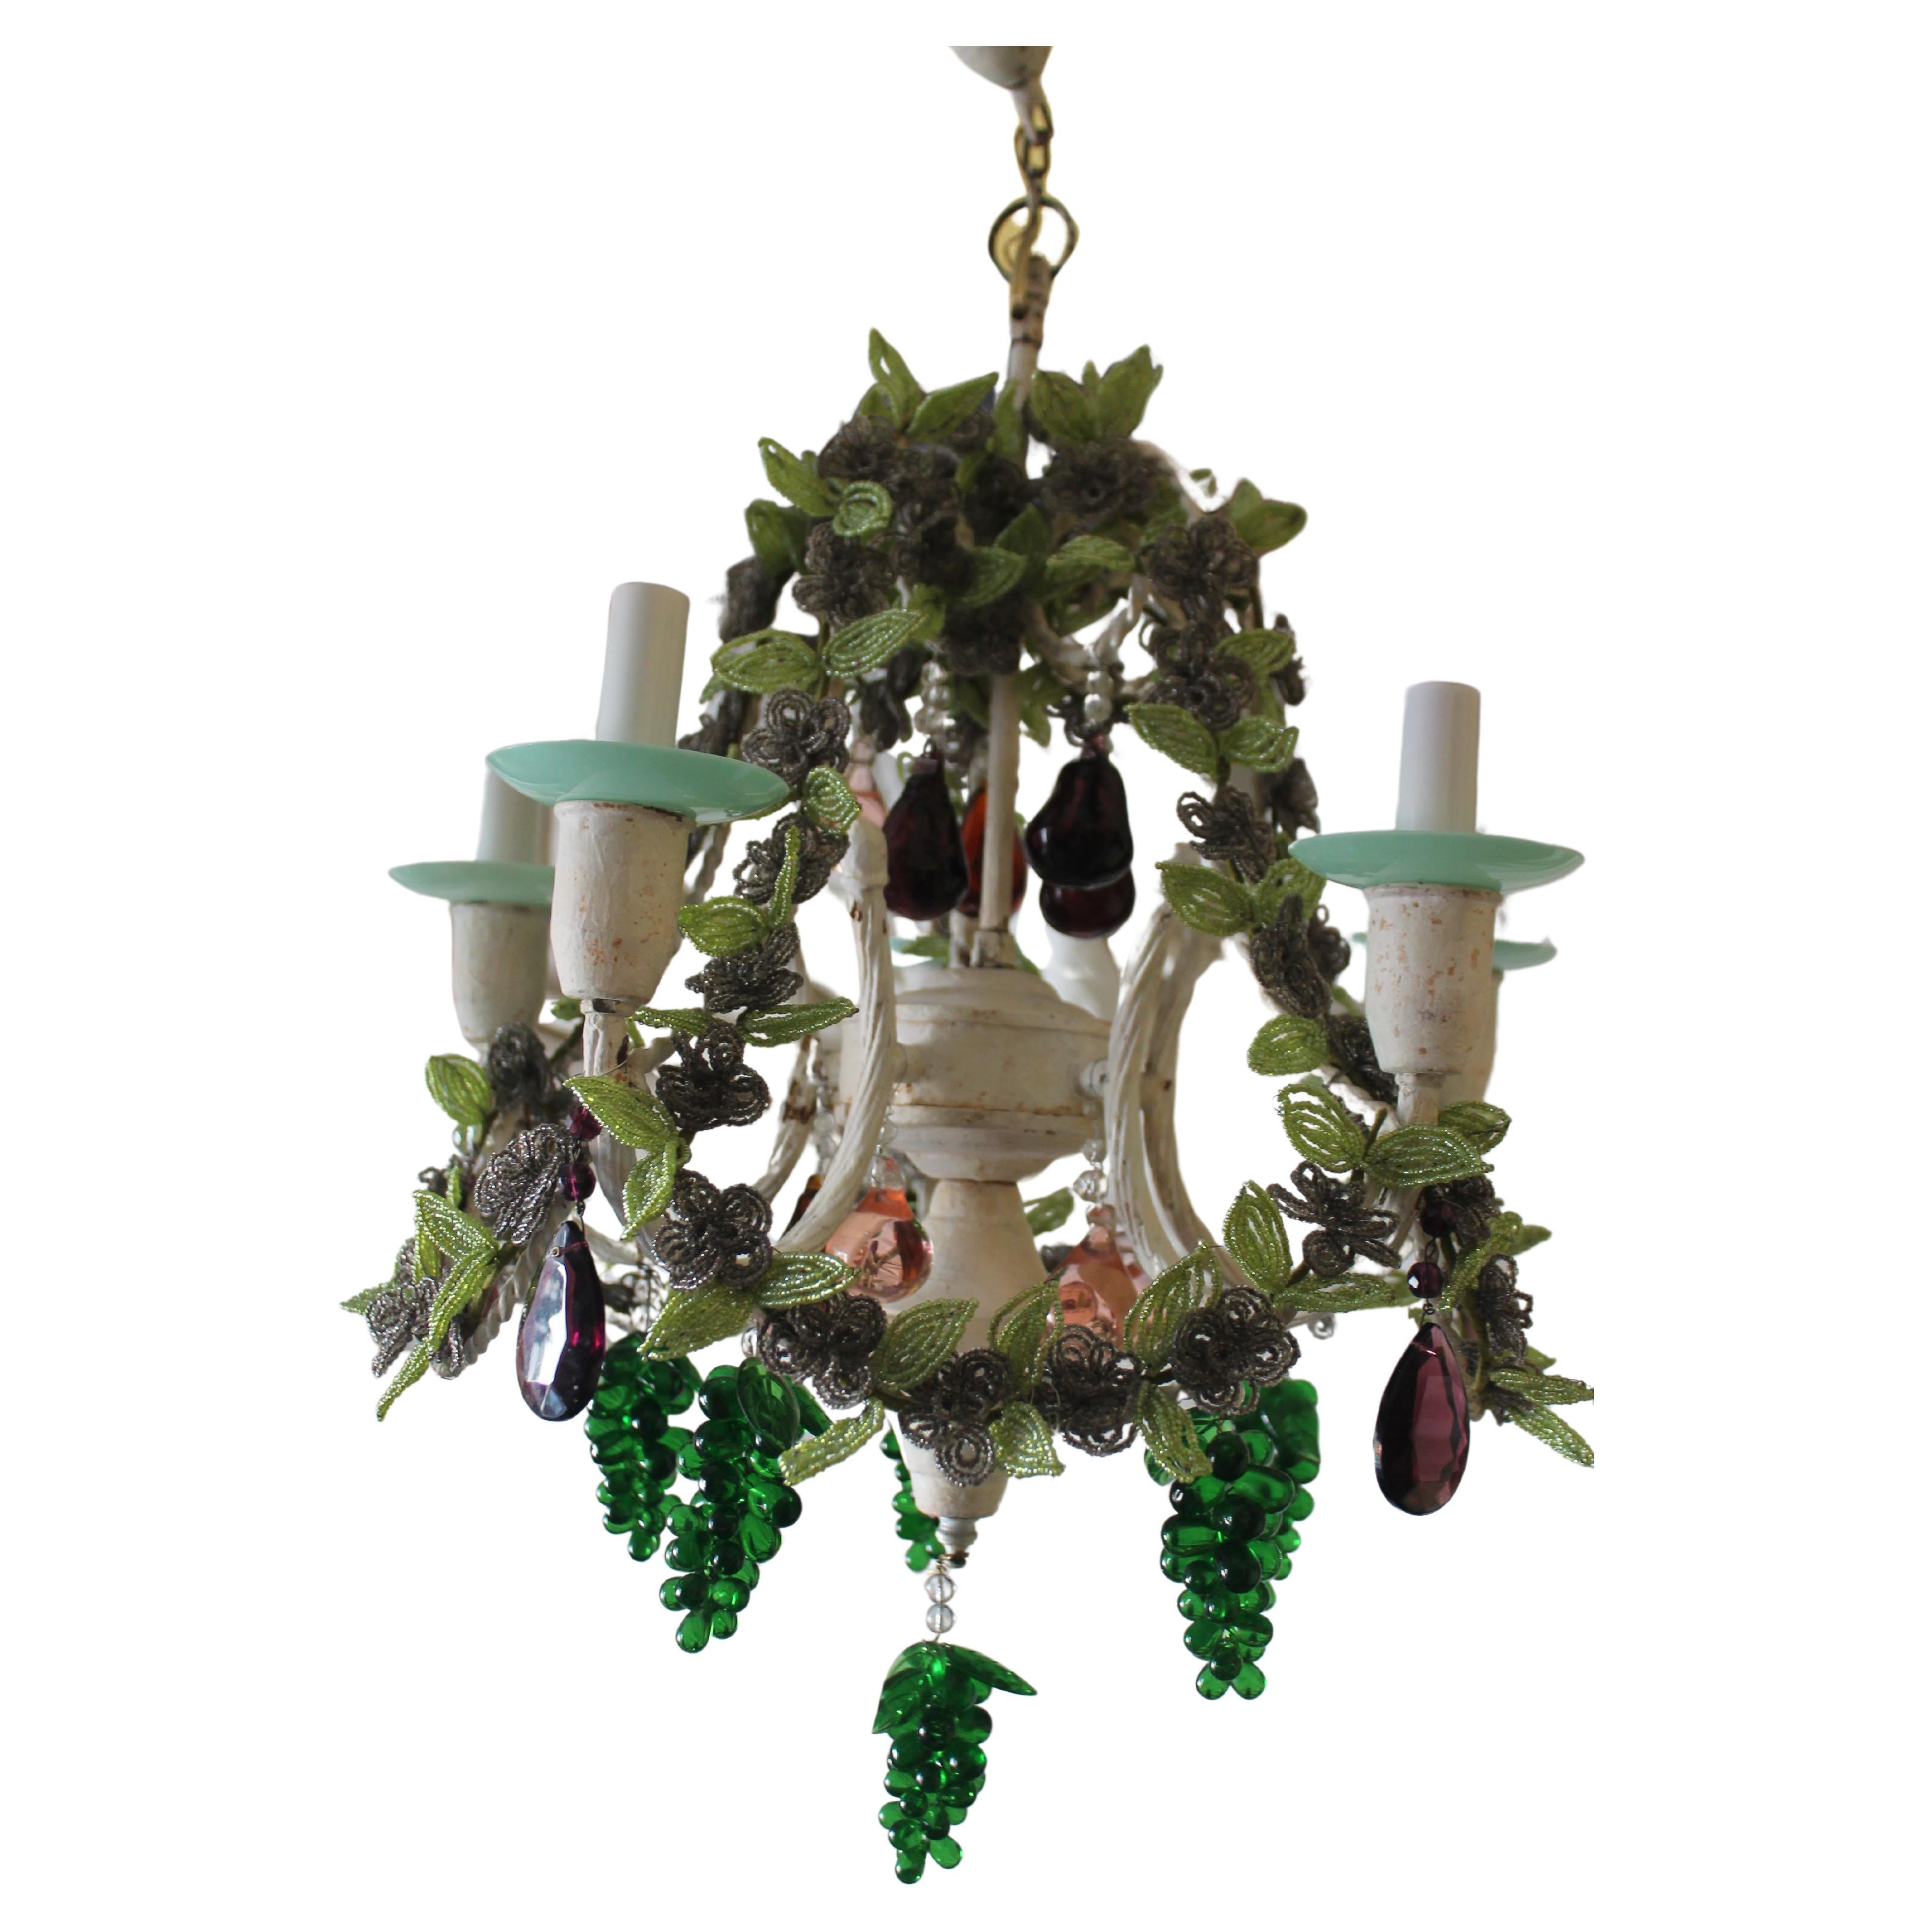 c1890 French Antique Art Nouveau Crystal Micro Beaded Chandelier. This chandelier is exquisite!. Crystal micro beaded amethyst and verde flowers and petals climbing the chandelier vines. This originally had a bronze frame but somebody along the way